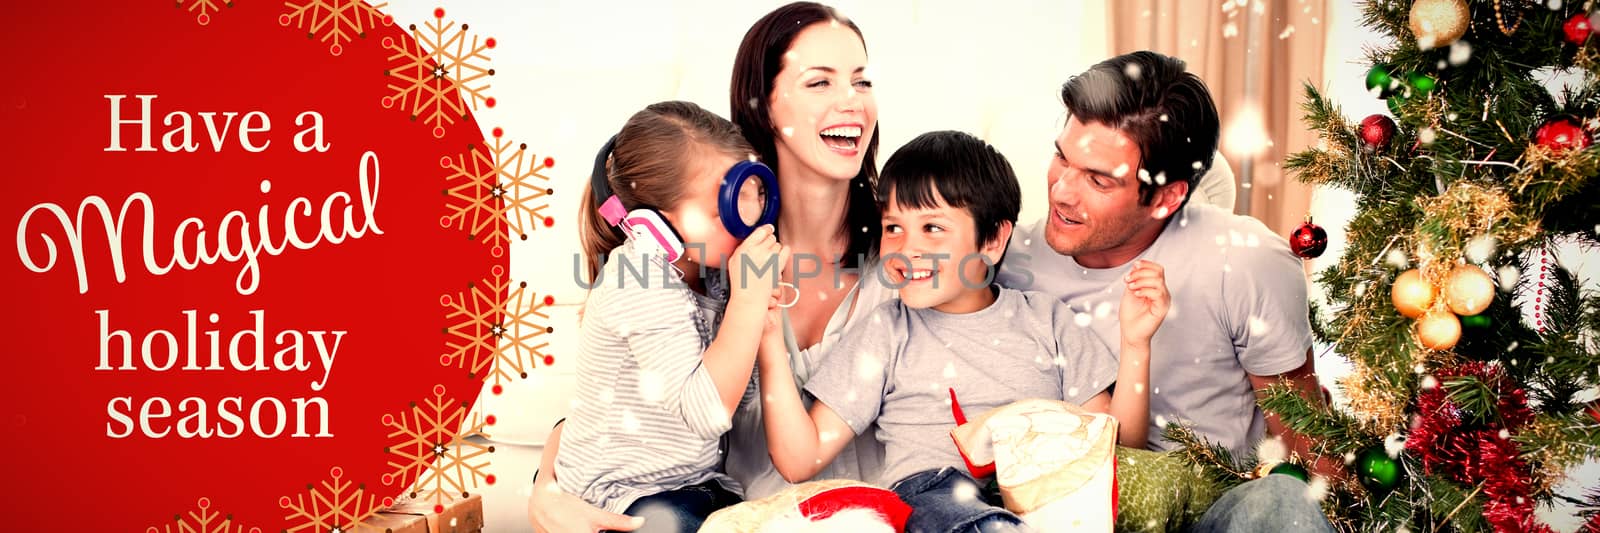 Happy family playing with Christmas gifts against white and red greetings card